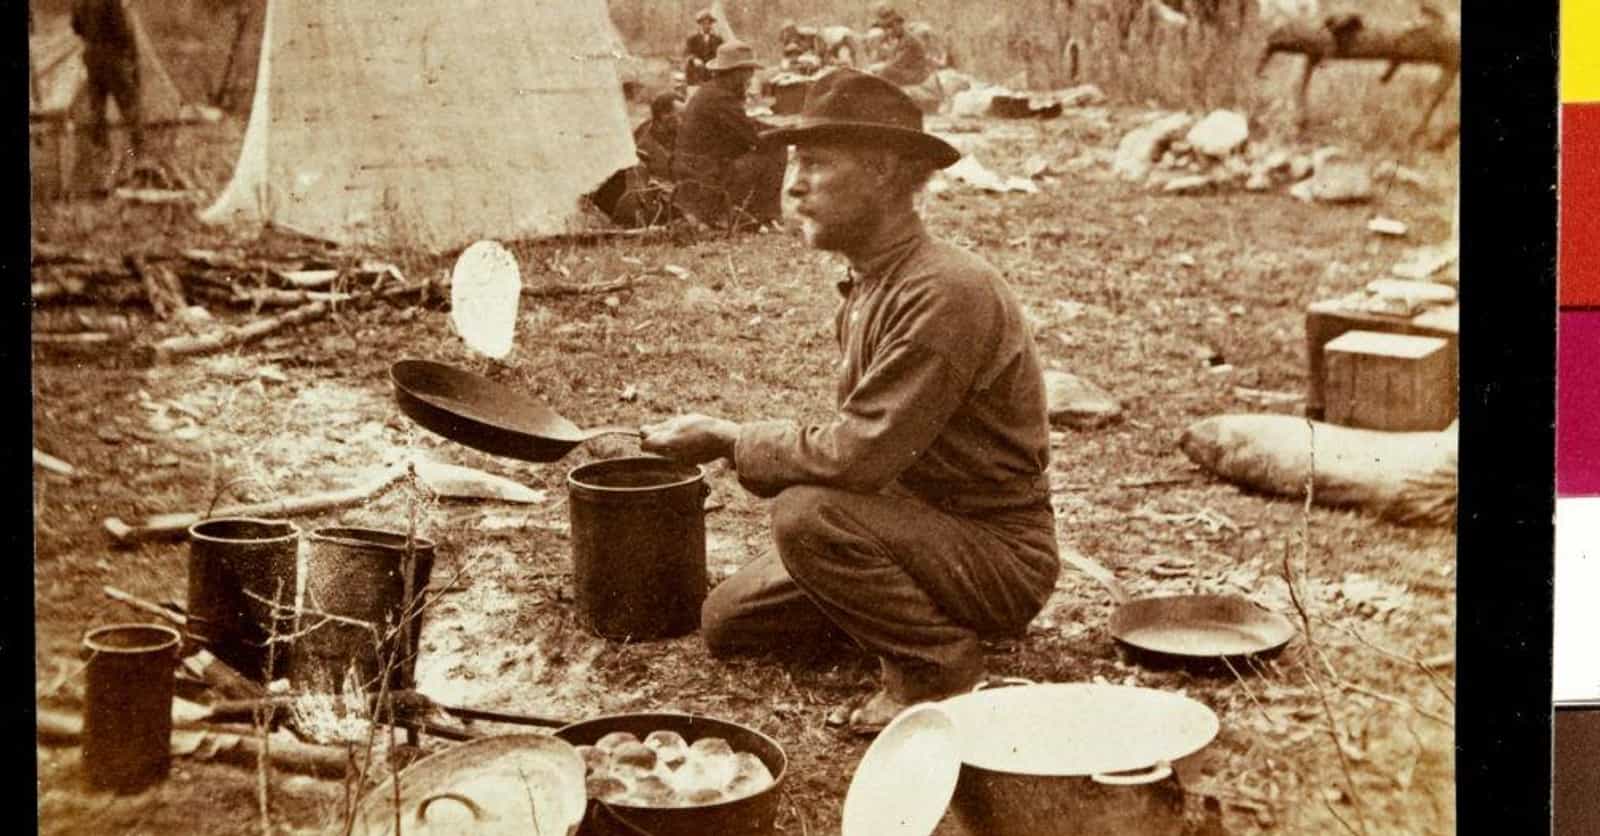 Unconventional Foods People Ate To Survive During The Civil War